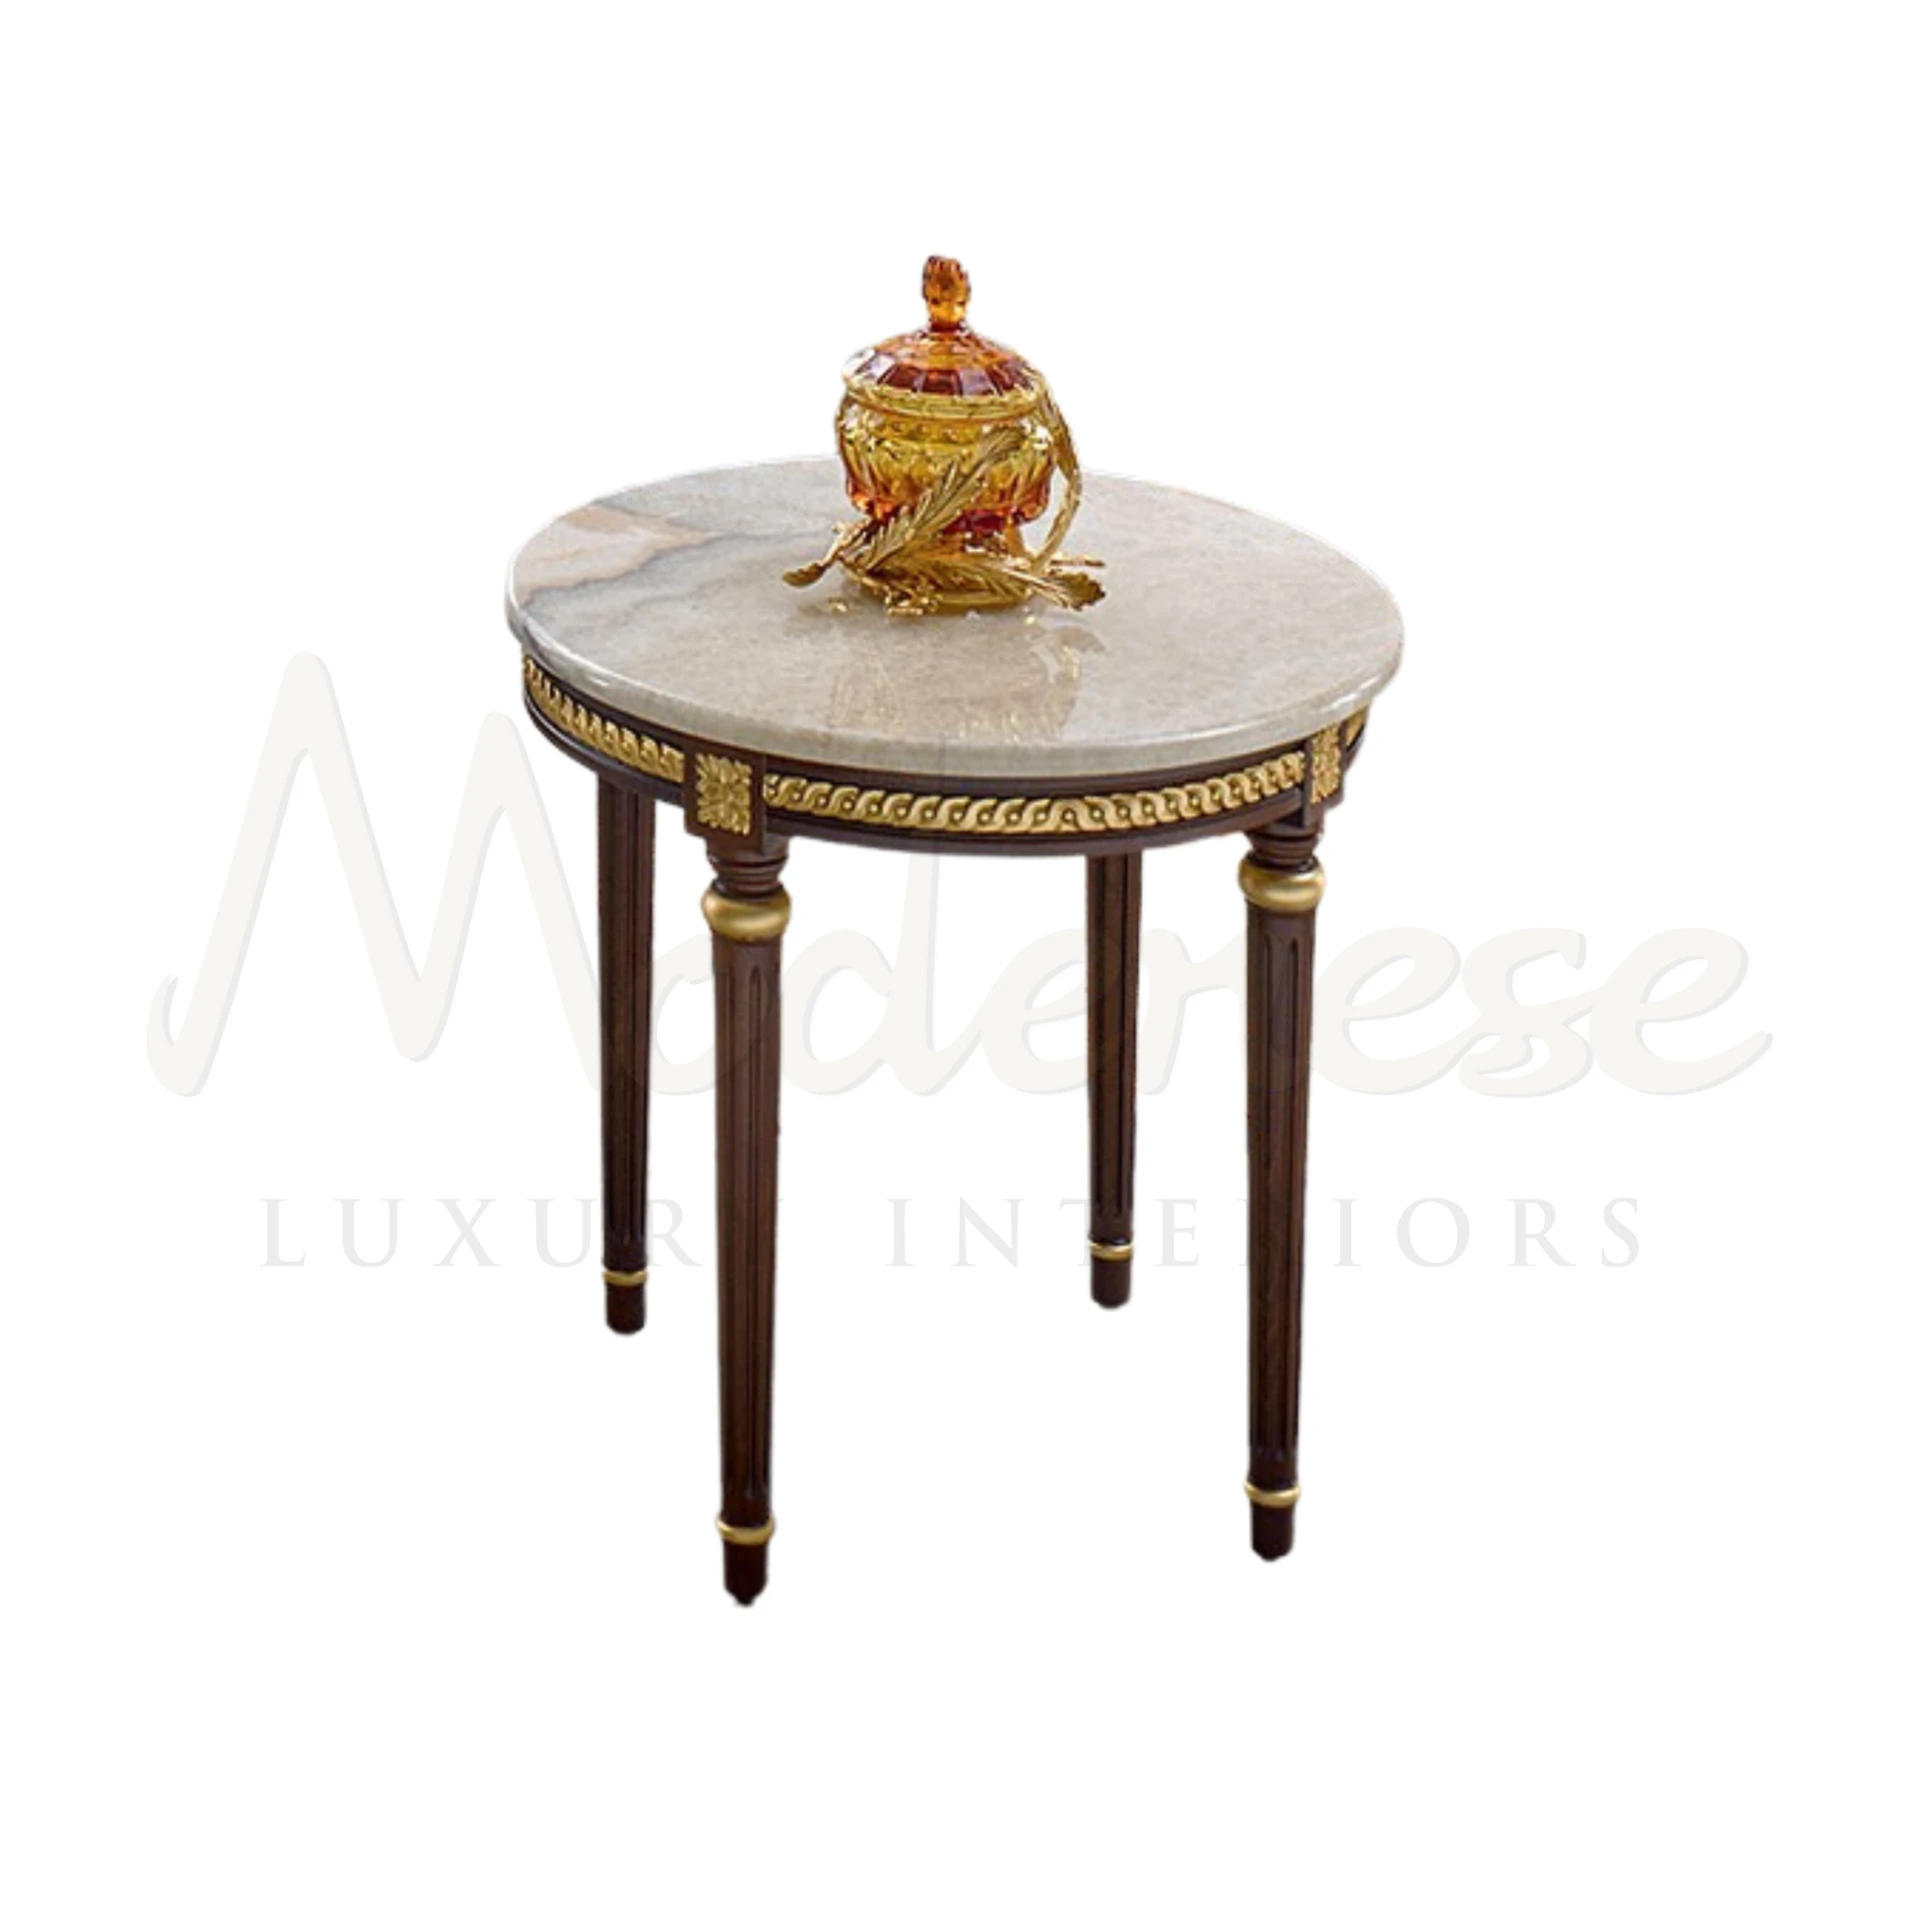 Luxurious Cappuccino Onyx Round Side Table with classic walnut finishing and gold leaf details, crafted by Italian artisans for elegance.